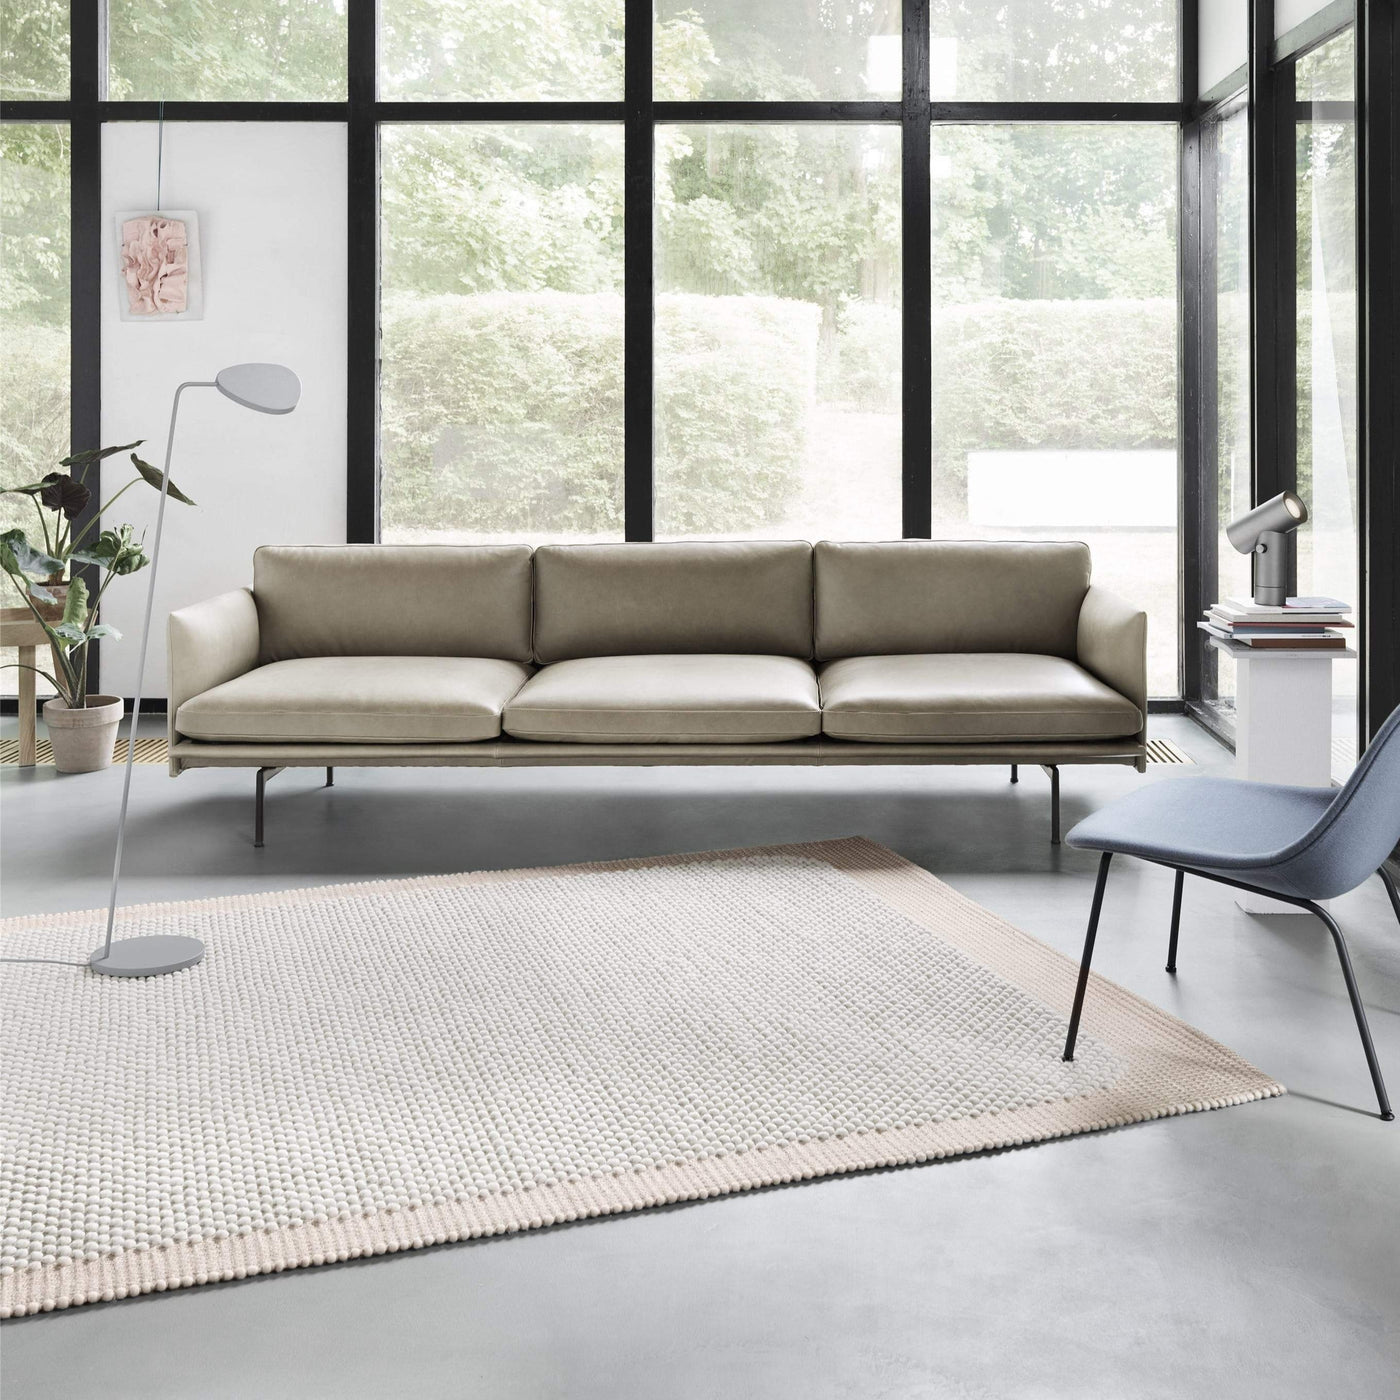 Muuto outline 3.5 seater in stone refine leather. Made to order from someday designs. #colour_beige-refine-leather